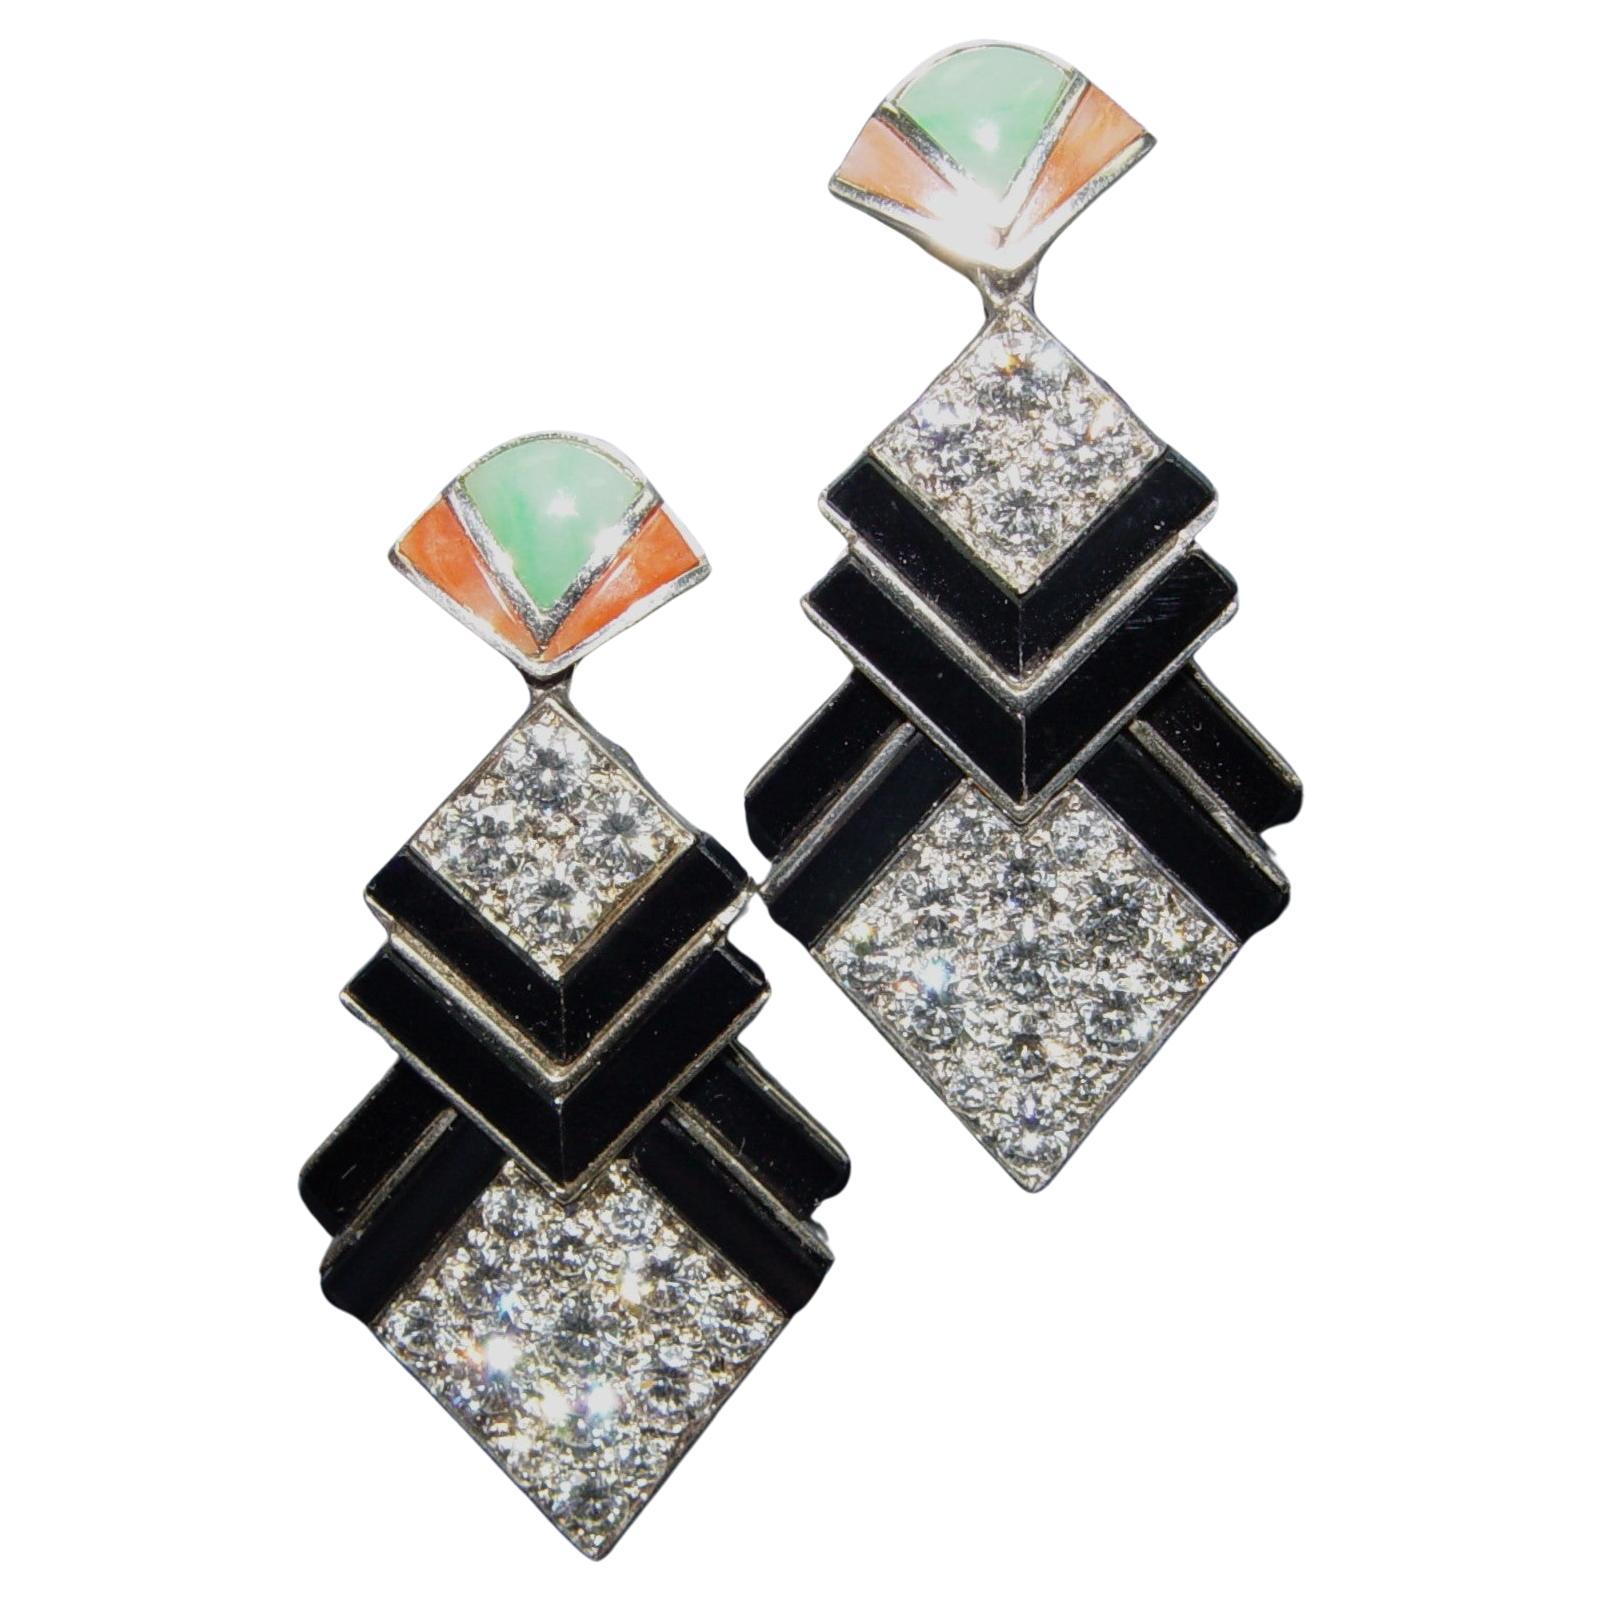 Beautiful Vintage Art Deco Style earrings earrings (most likely 1950's) - beautiful craftsmanship. Earrings encrusted with round brilliant cut natural diamonds - we estimate 5.00CT + total weight (measuring from 2.5MM to 3.8MM in diameter. F-G in